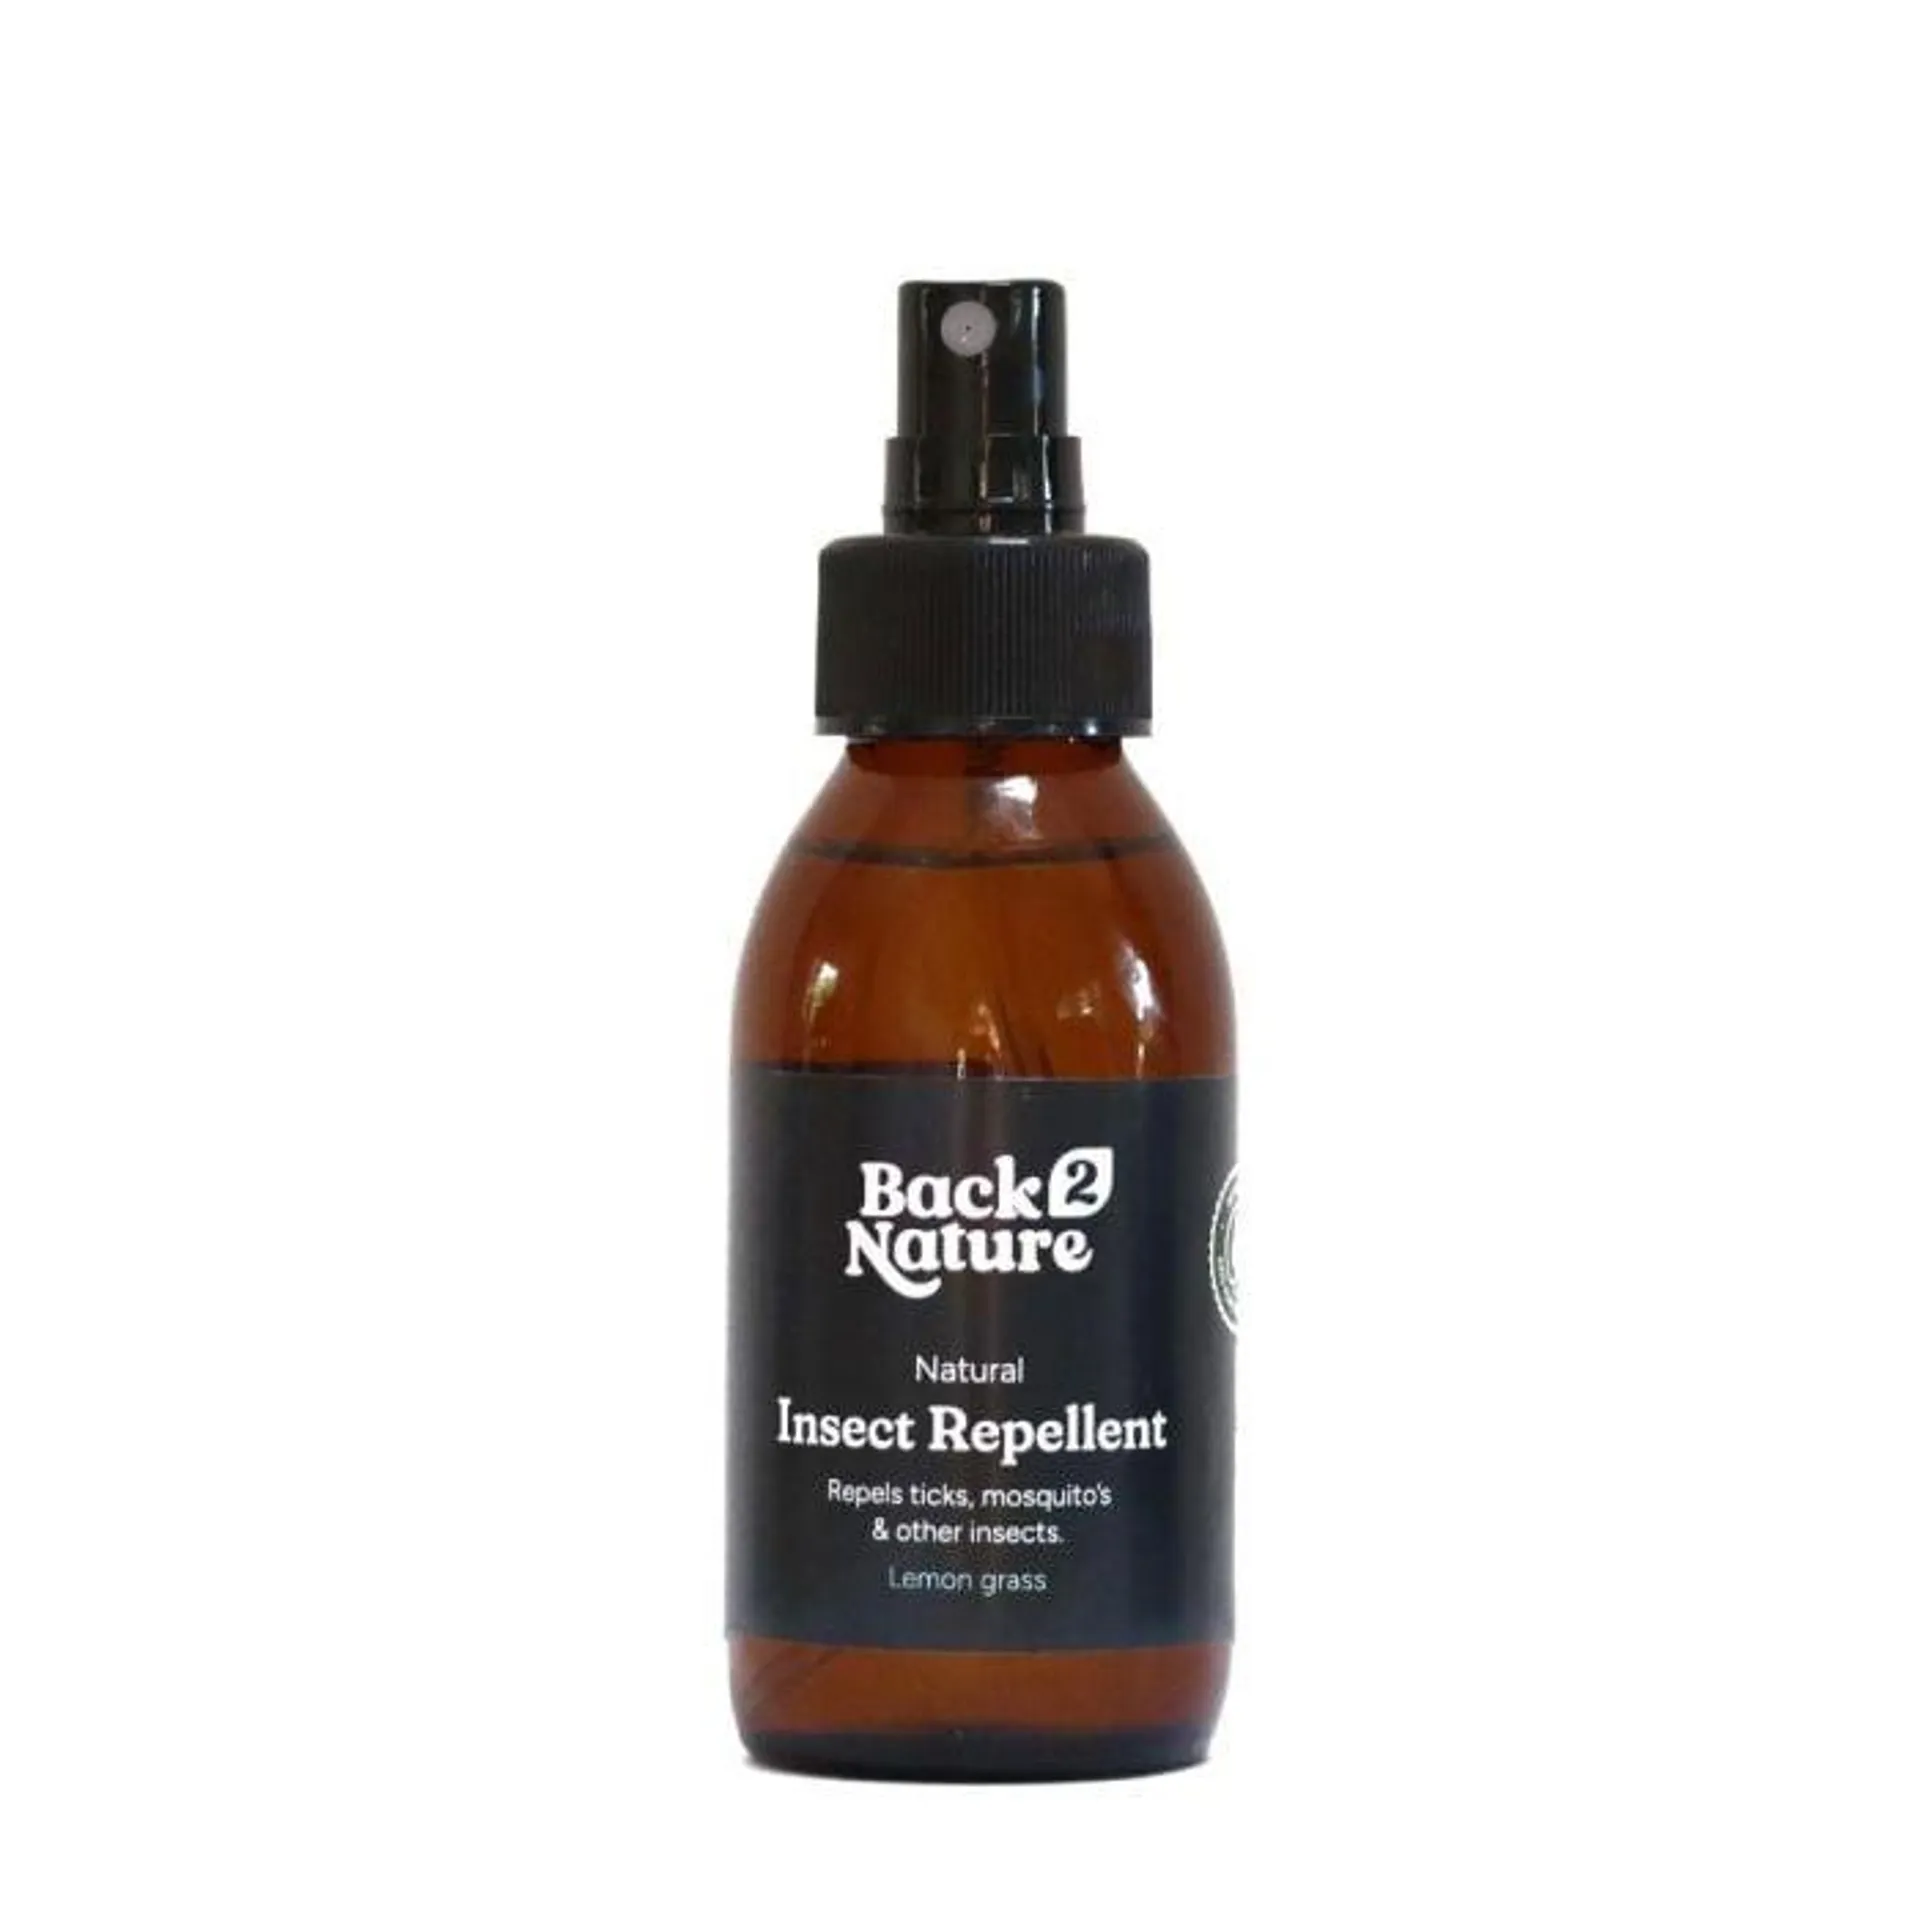 Back 2 Nature - Natural Insect Repellent 100ml